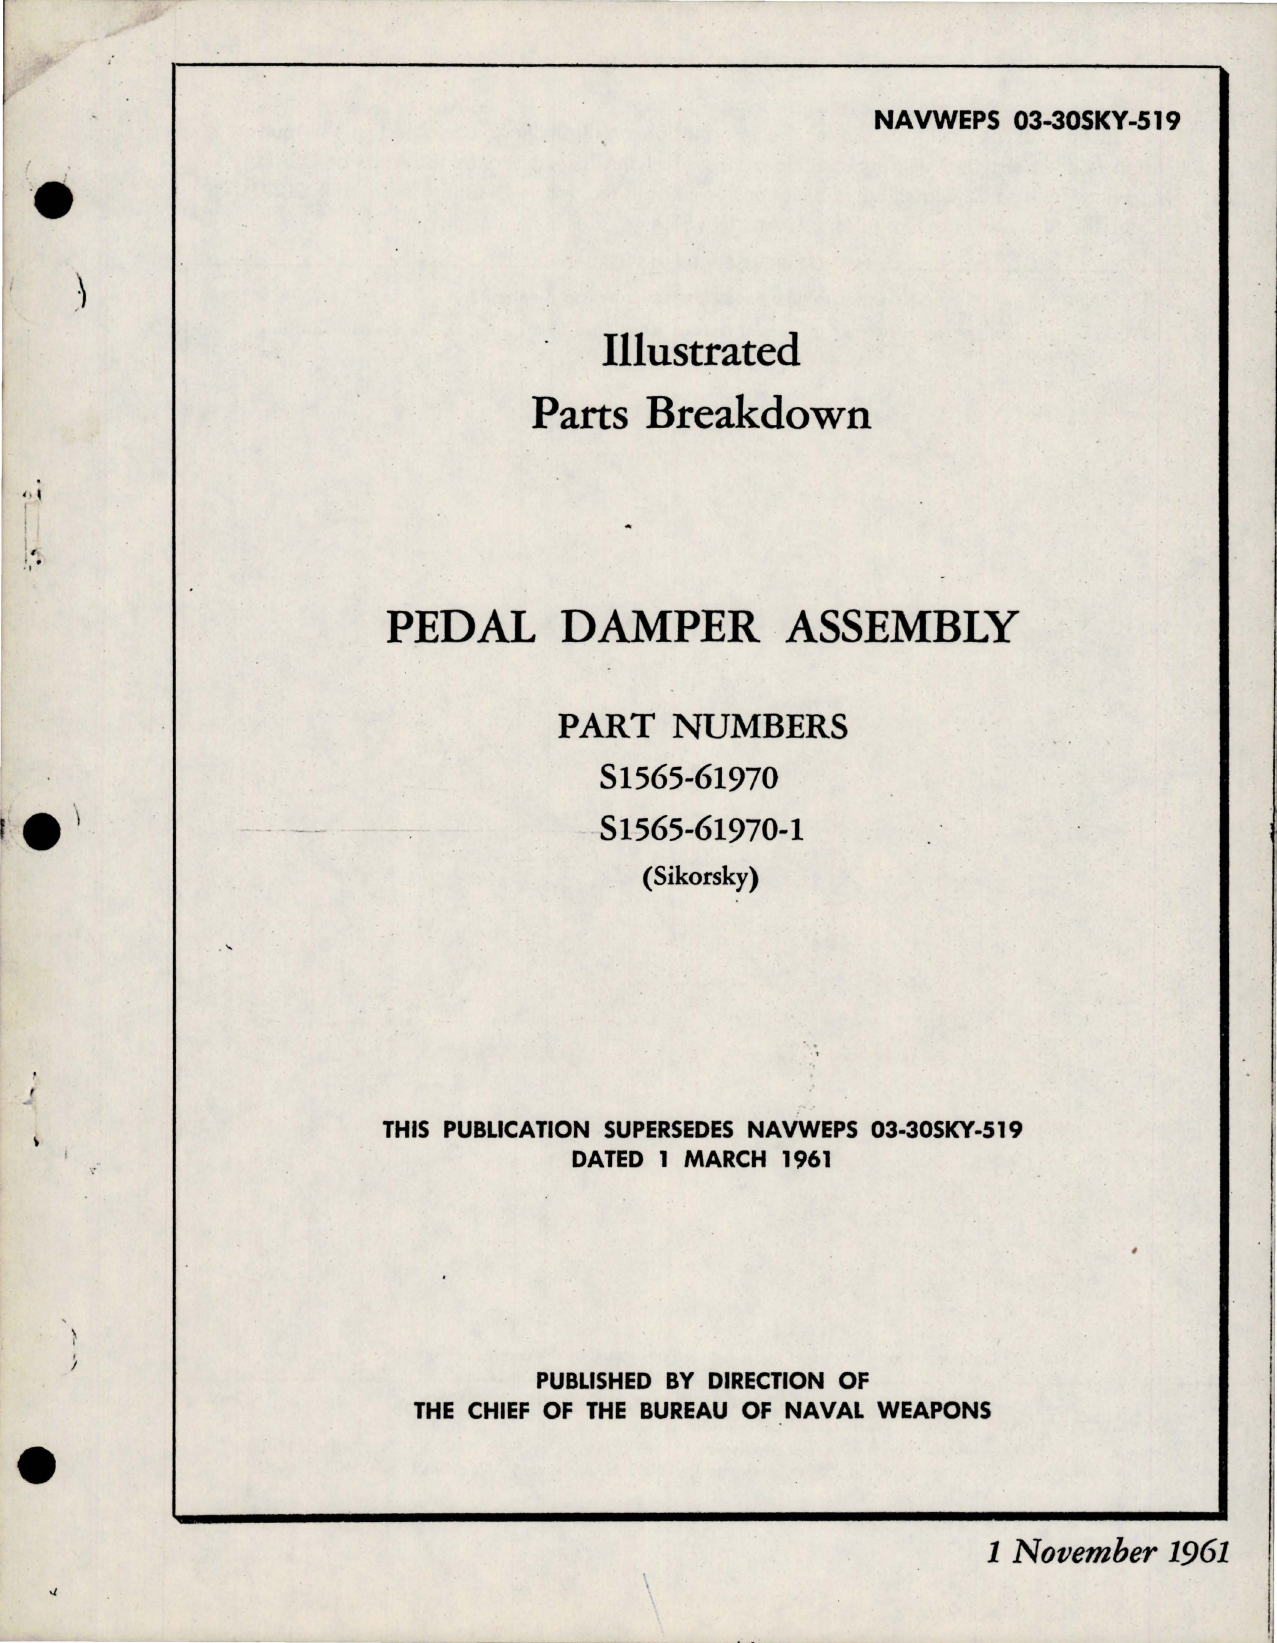 Sample page 1 from AirCorps Library document: Parts Breakdown for Pedal Damper Assembly - Parts S1565-61970 and S1565-61970-1